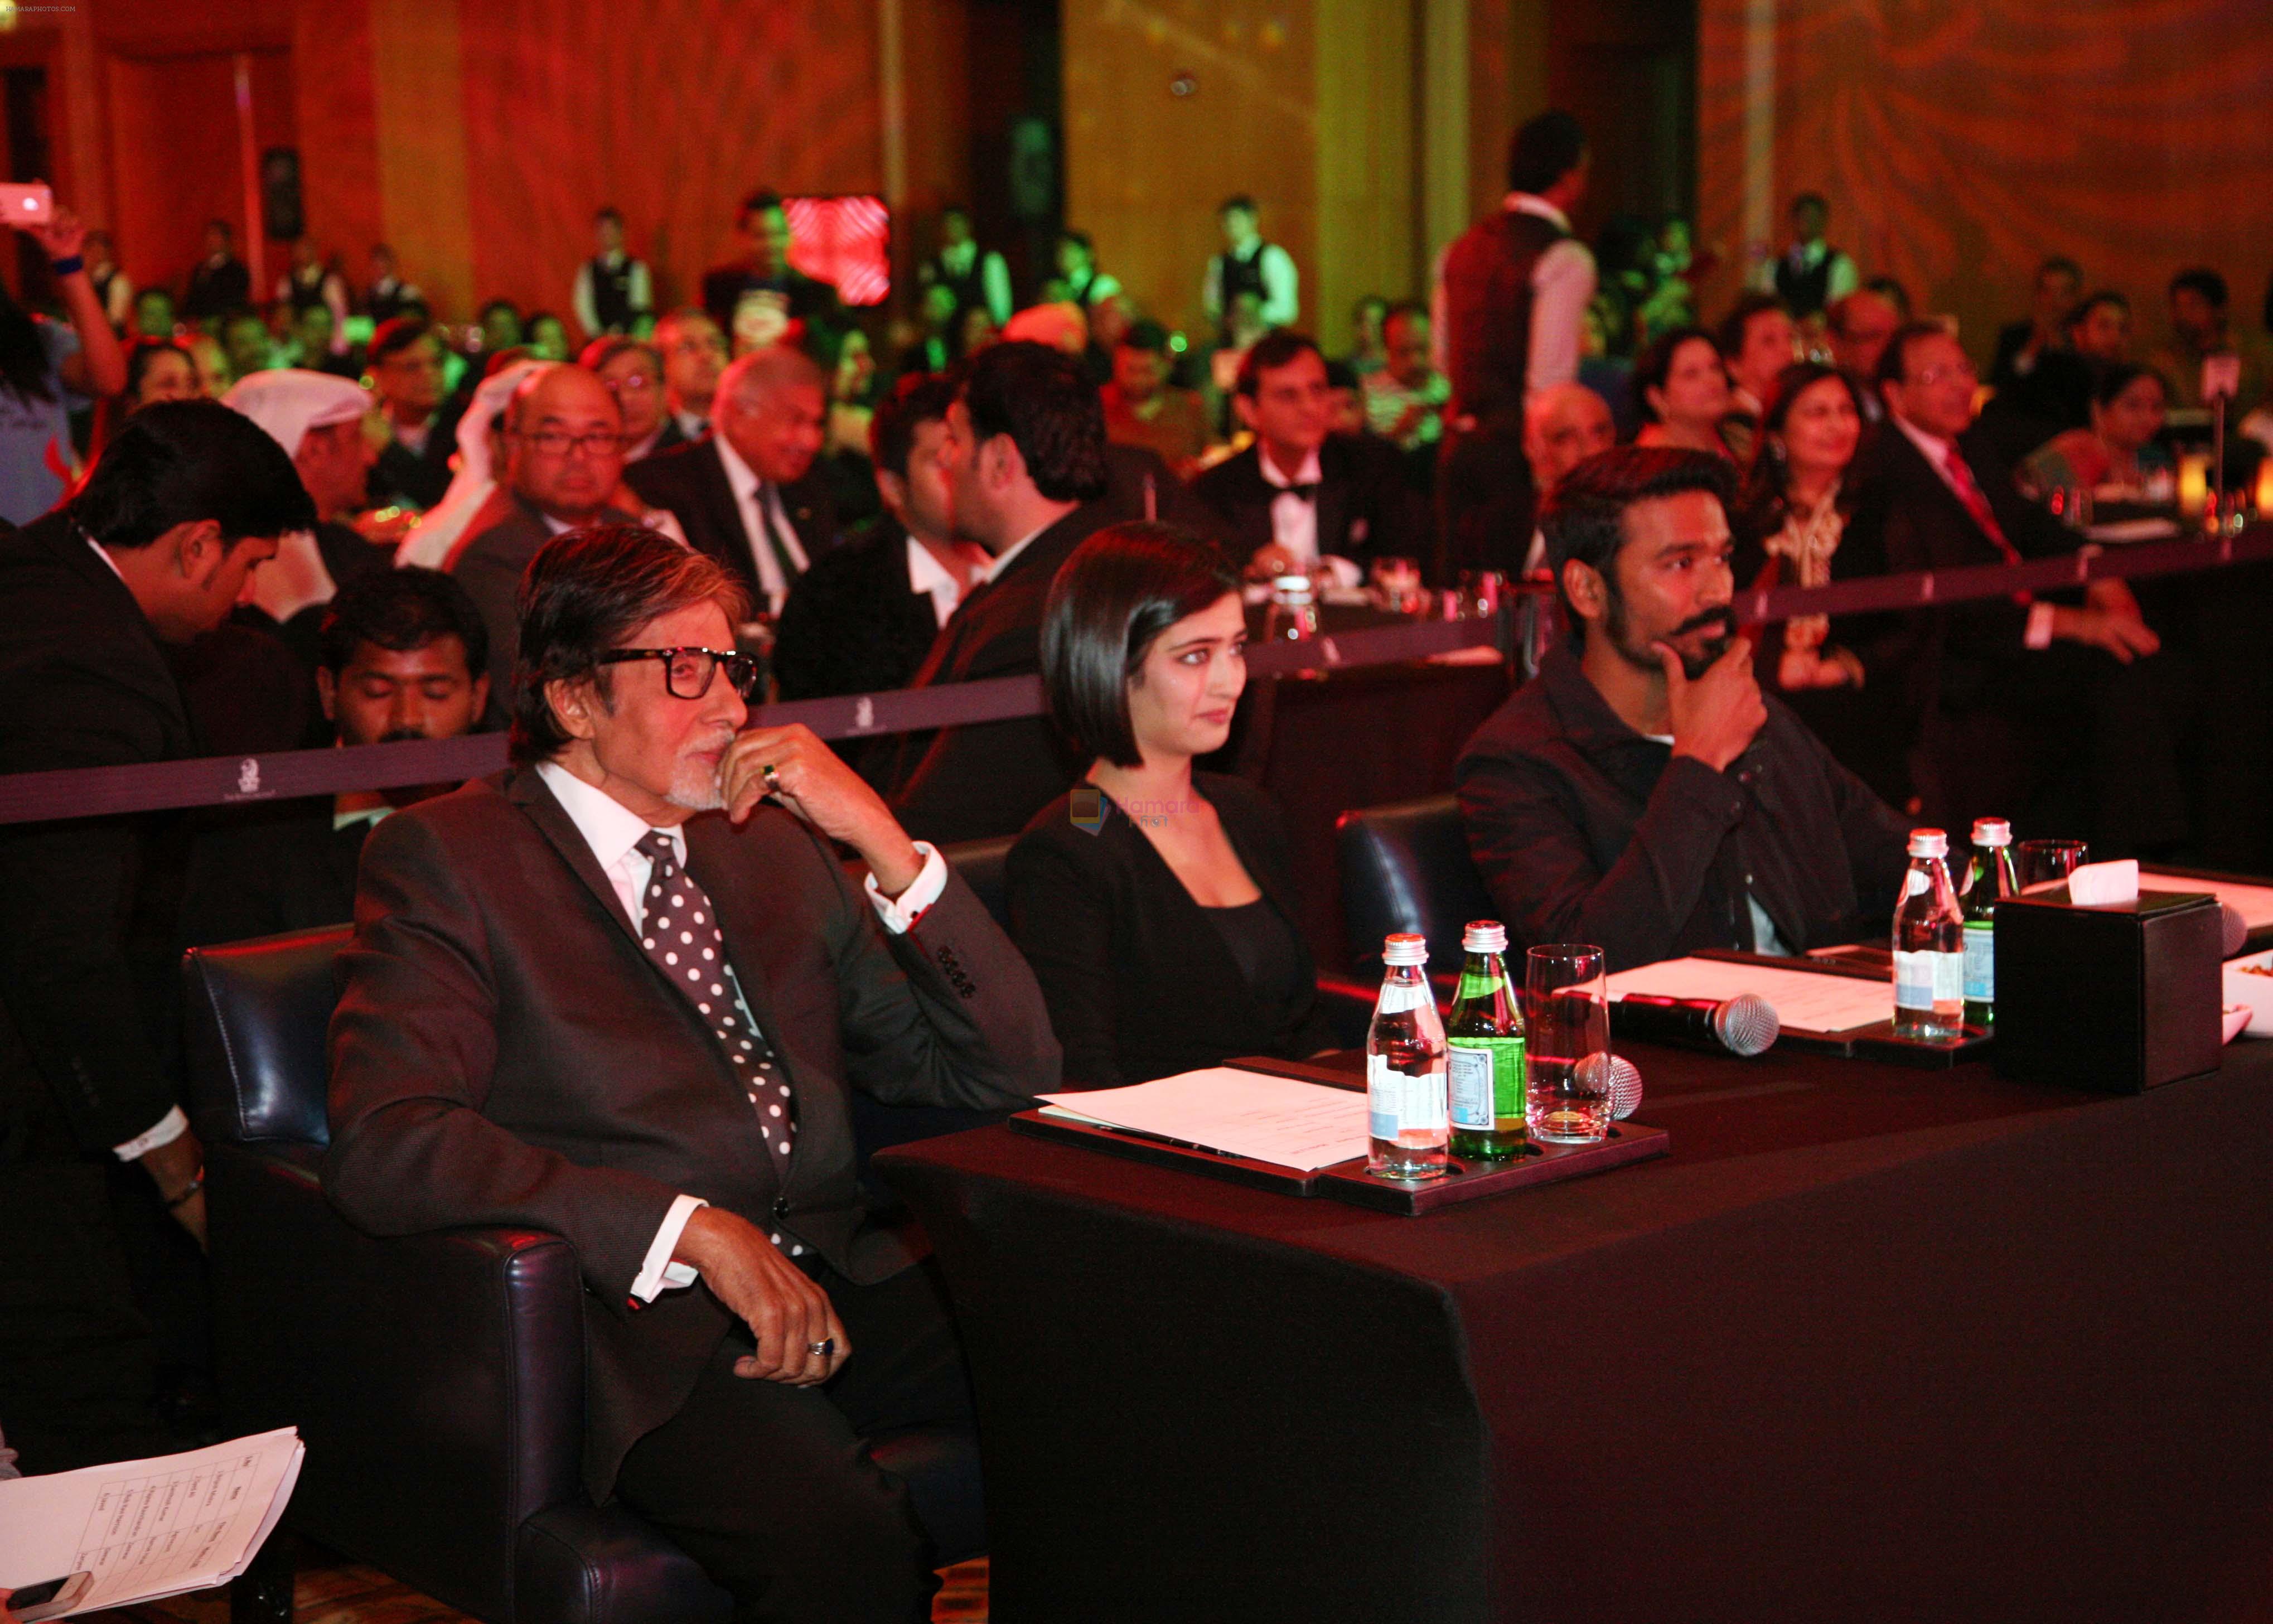 Amitabh Bachchan, Dhanush, Akshara at the Premiere Production house, headed by Mr. Javed Shafi hosted a perfect evening to Shamitabh in the UAE on 29th Jan 2015